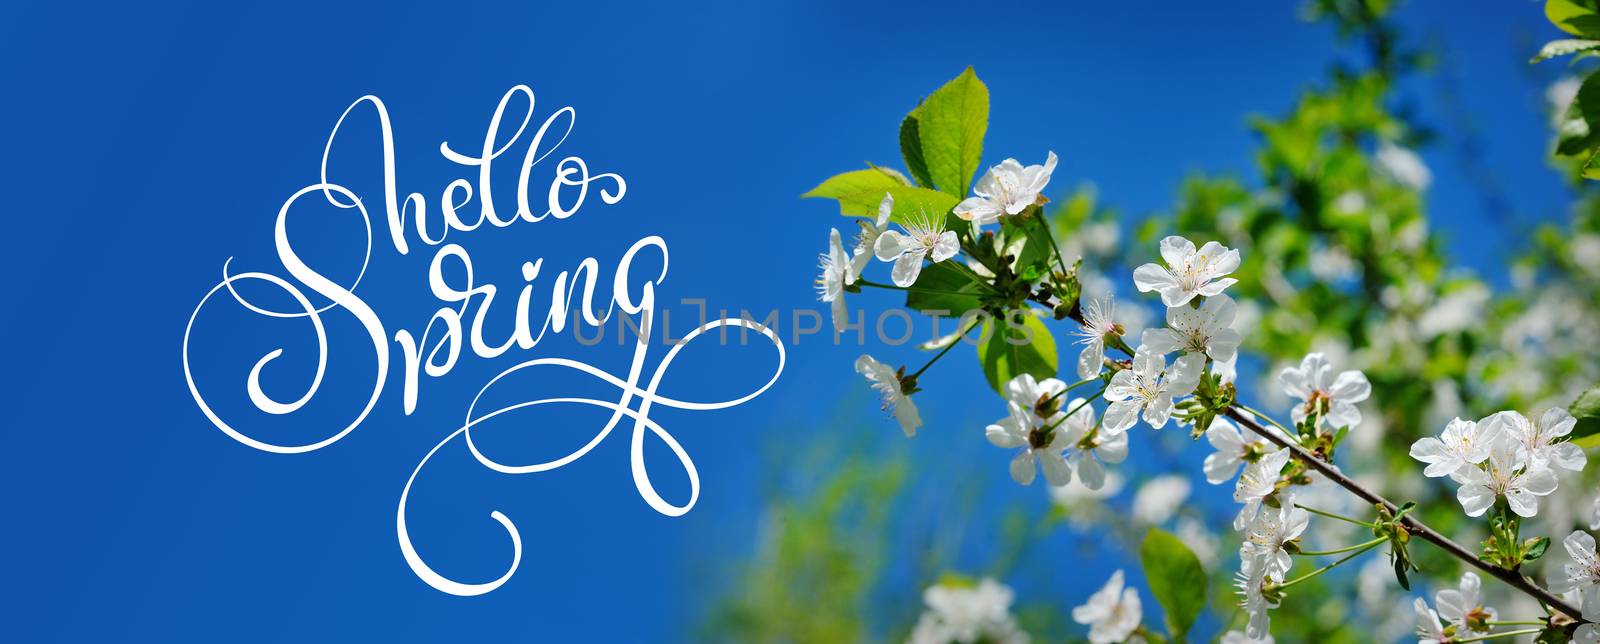 Beautiful blooming spring garden on a background of blue sky and text Hello Spring. Calligraphy lettering by timonko